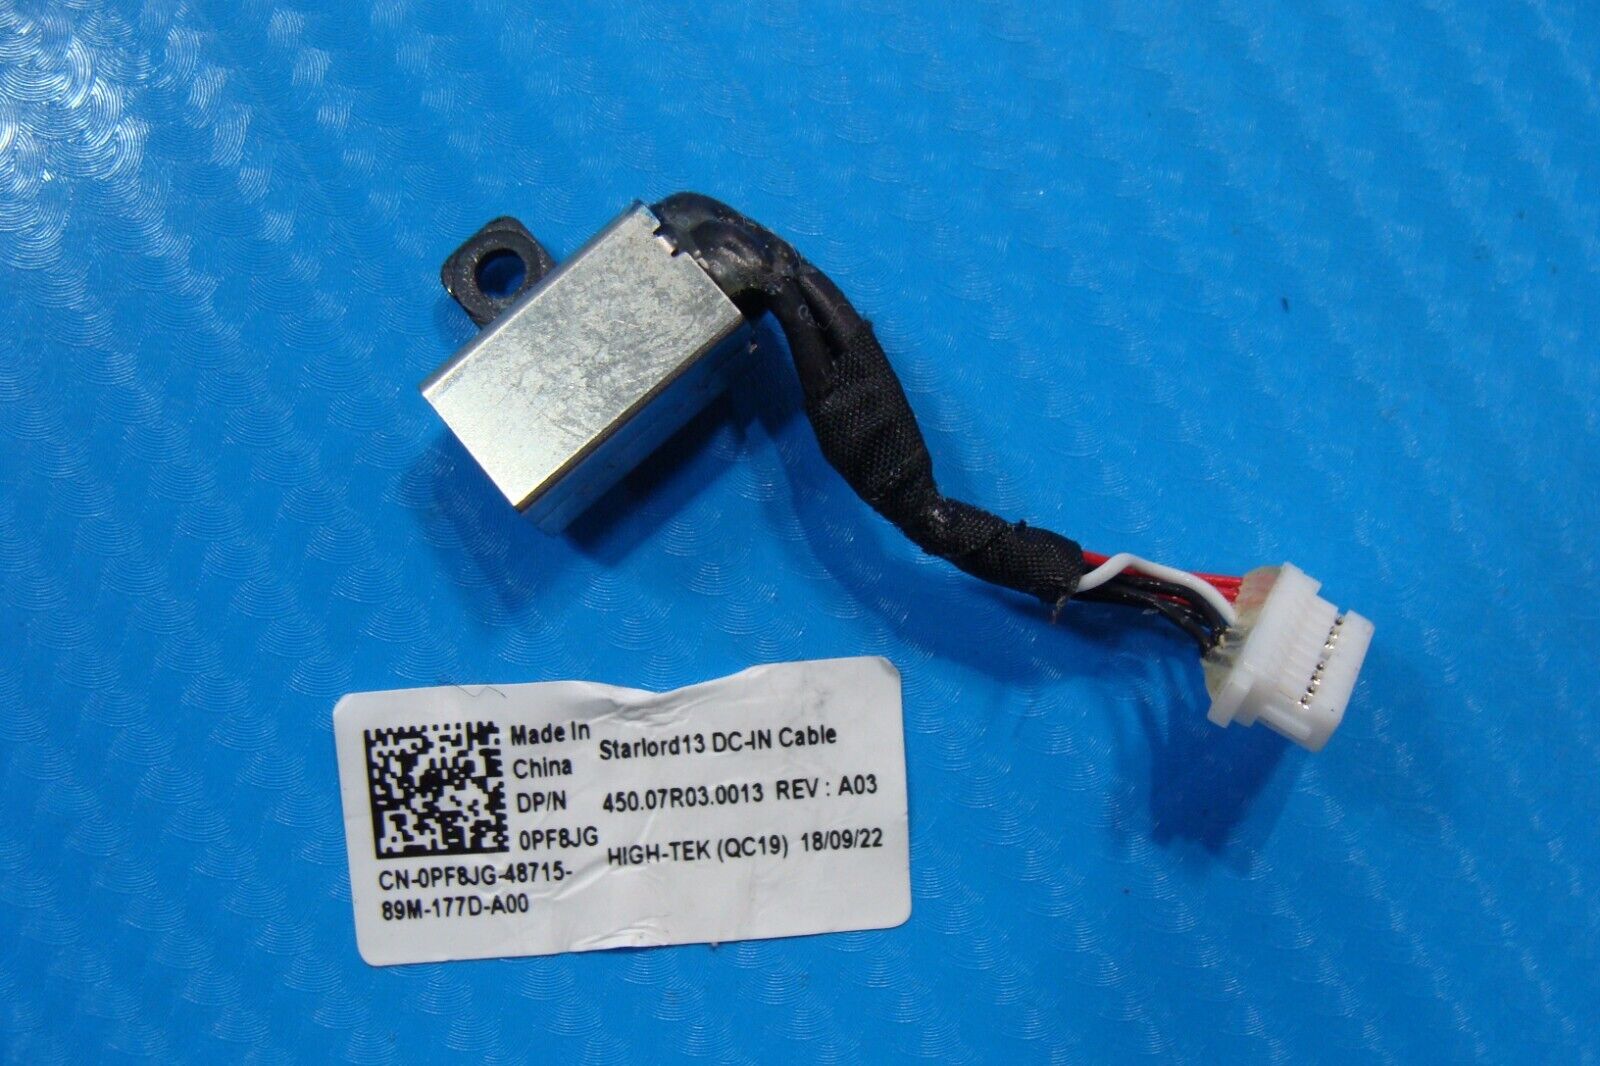 Dell Inspiron 15.6” 15 5579 2n1 DC IN Power Jack w/Cable PF8JG 450.07R03.0013